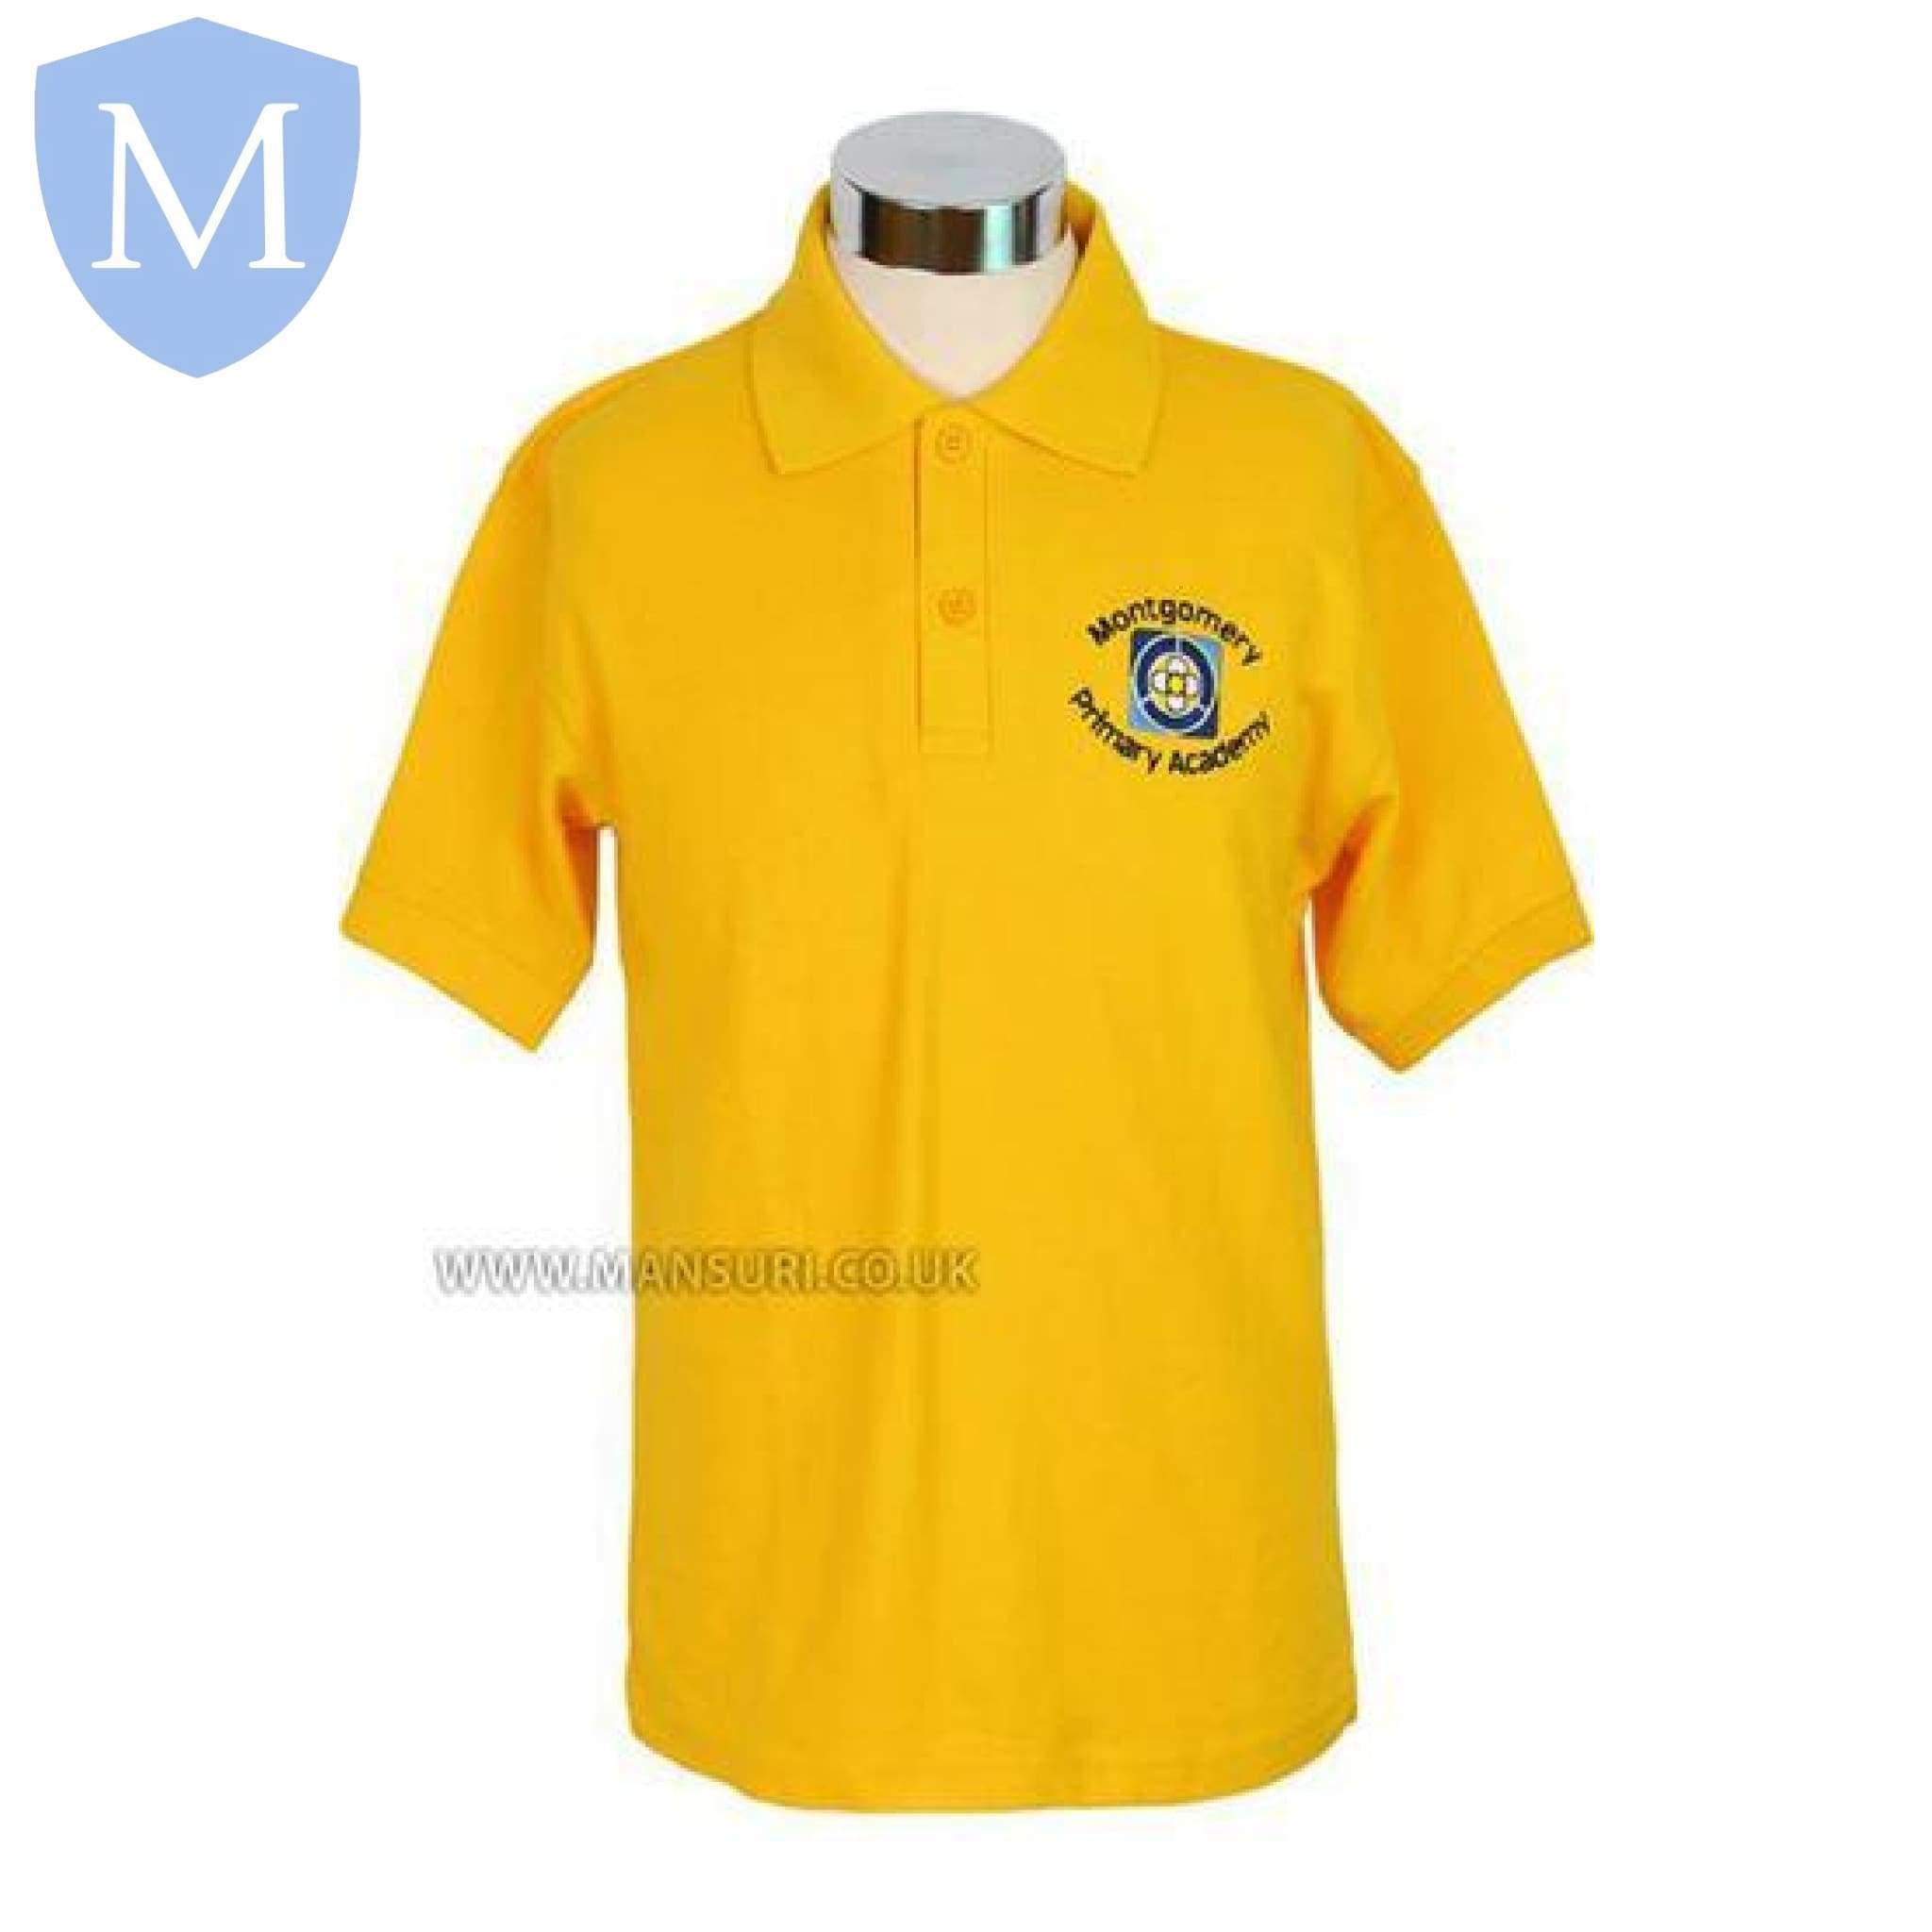 Montgomery Primary Academy Polo Shirt Size - 22 2Years,Size - 24 3-4Years,Size - 26 5-6Years,Size - 28 7-8Years,Size - 30 9-10Years,Size - 32 11-12Years,Size - 34 12-13Years,Size - Large,Size - Medium,Size - Small,Size - X-Large